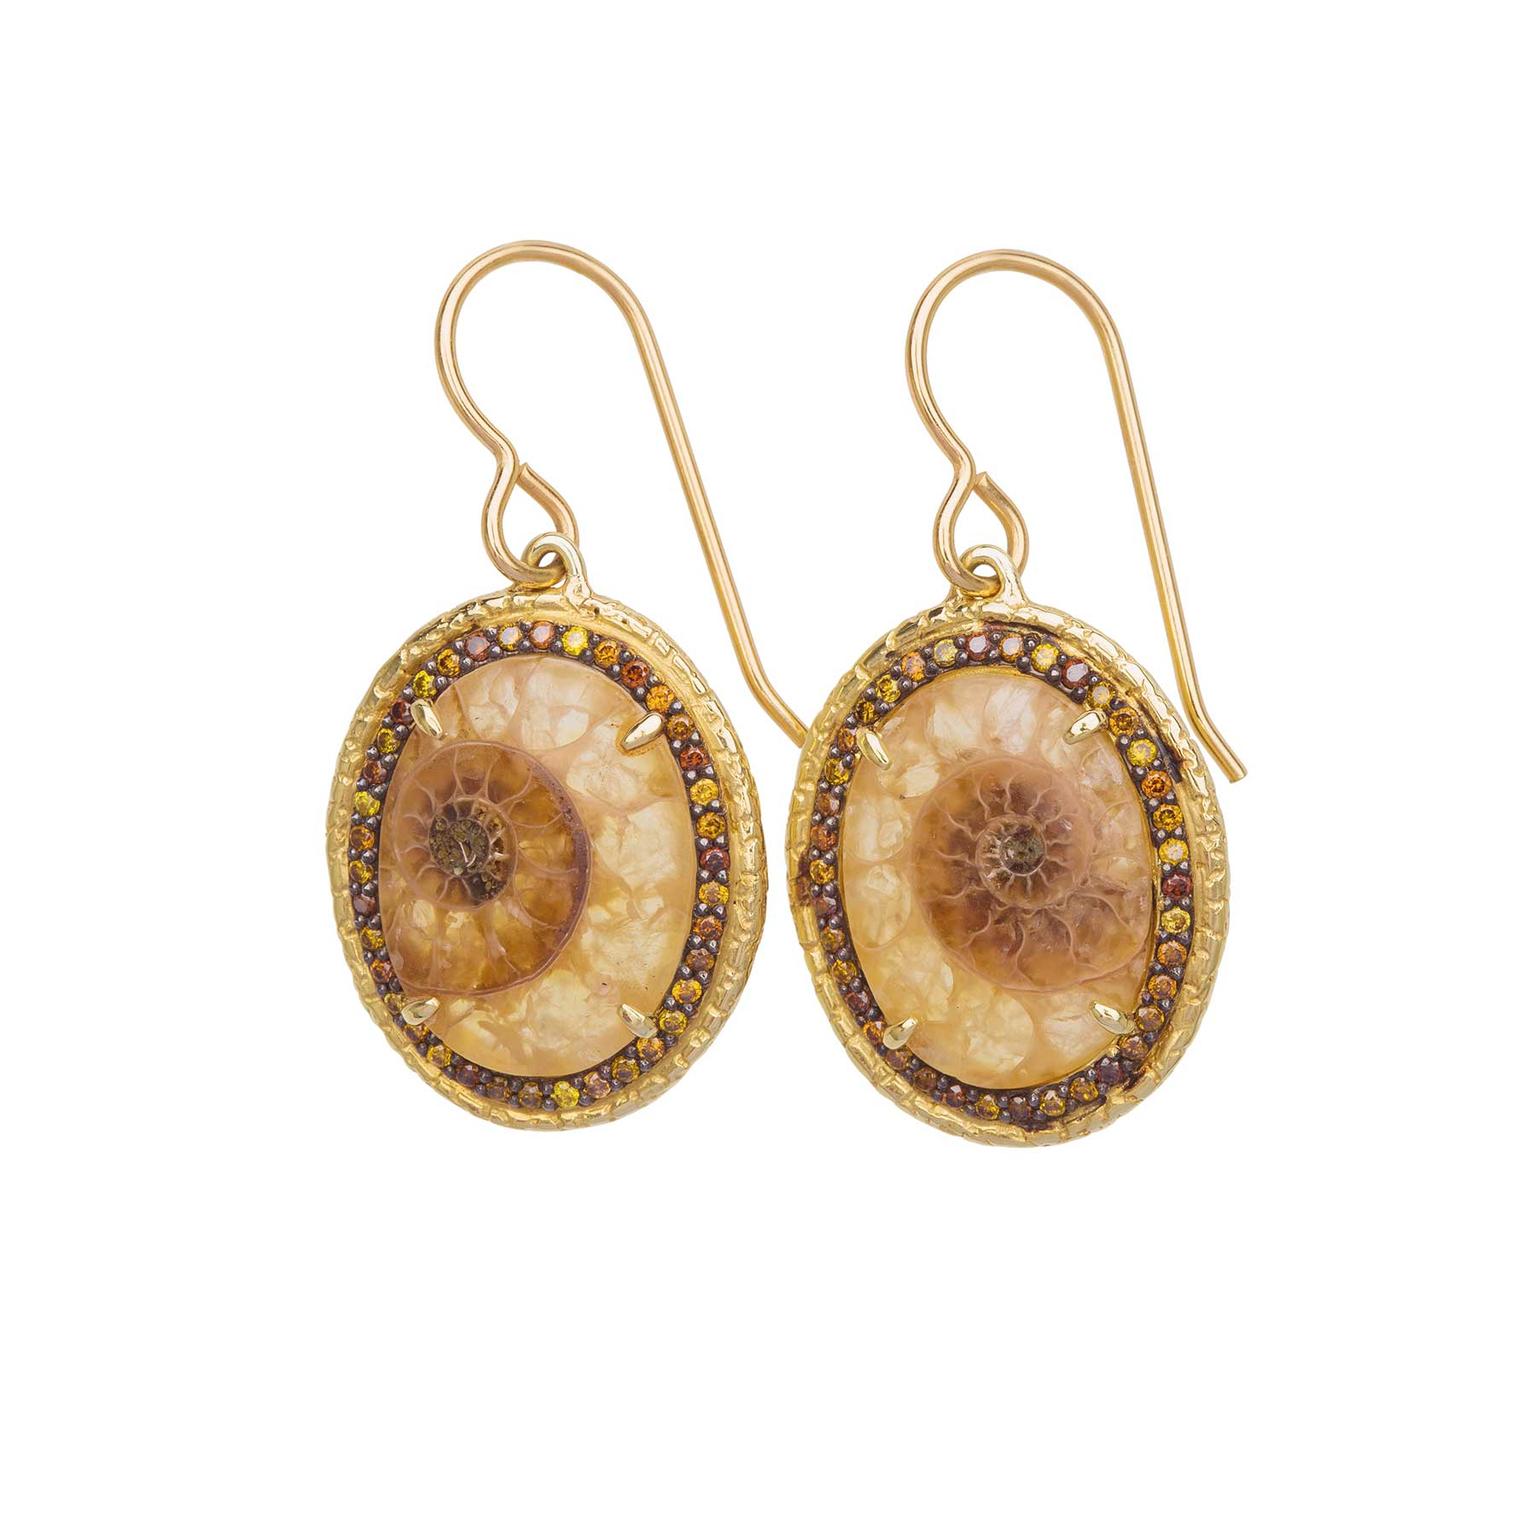 Susan Wheeler earrings with ammonite fossilized shells